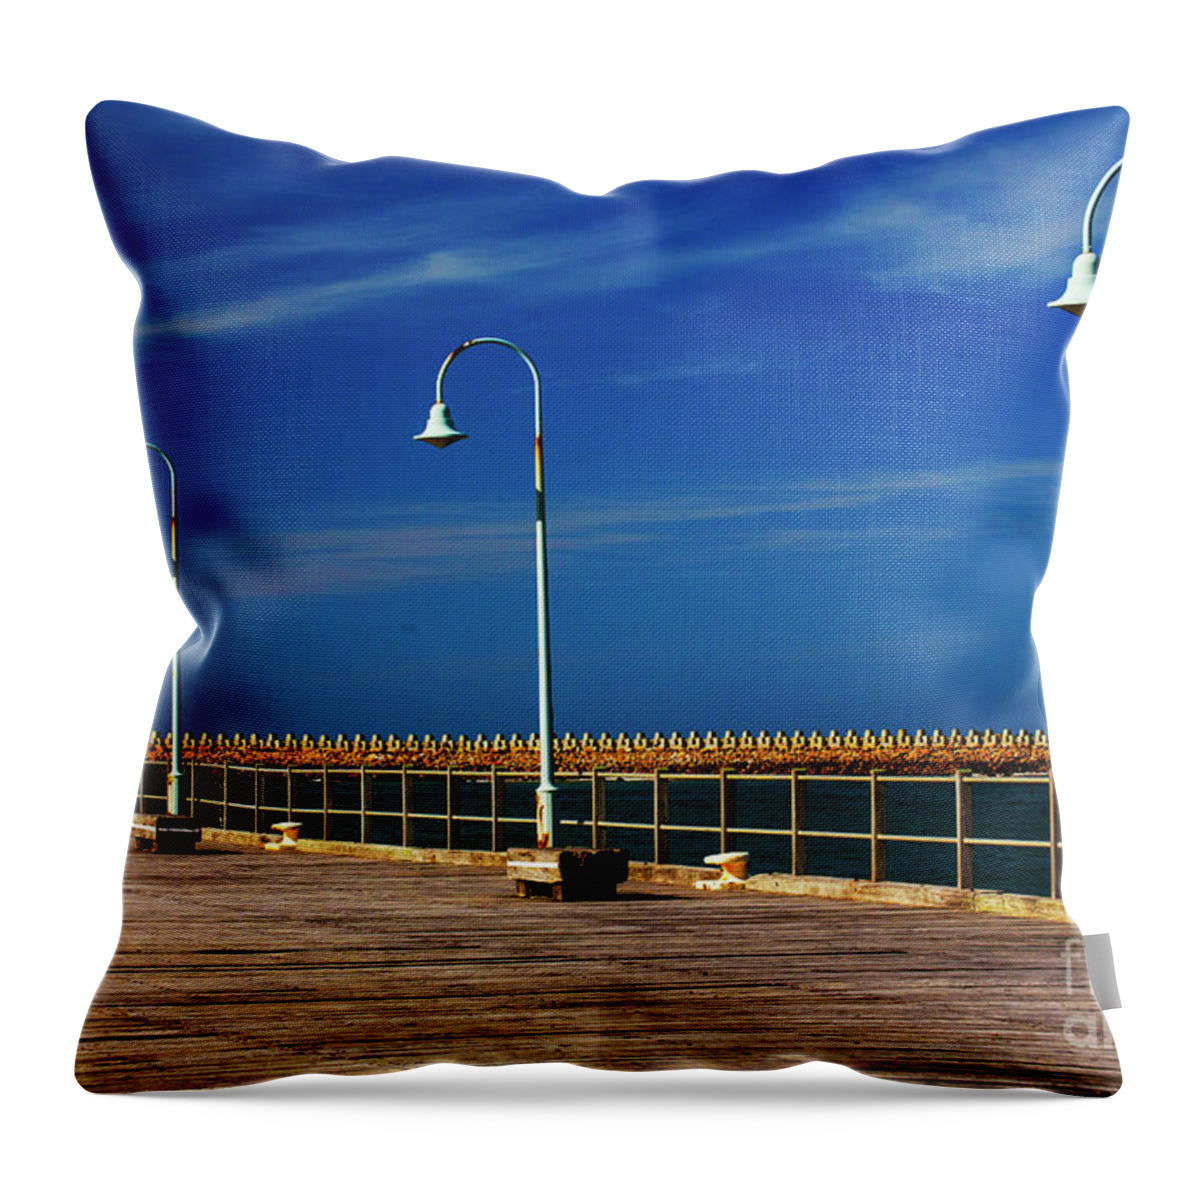 Four Lamps Throw Pillow featuring the photograph Four lamps by Sheila Smart Fine Art Photography